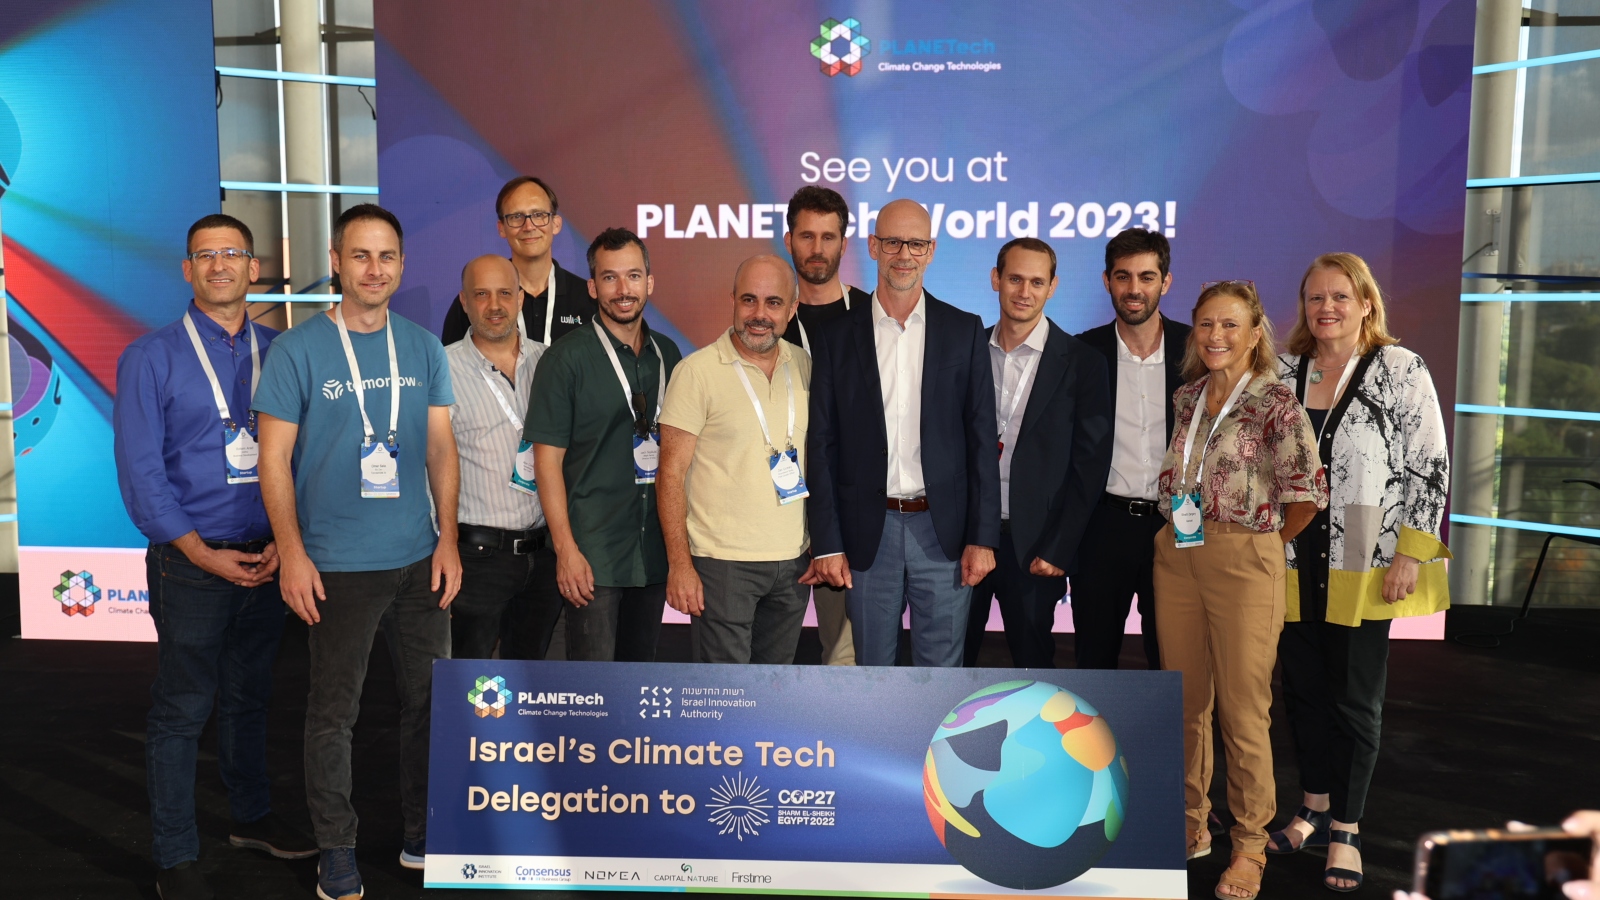 Israelâ€™s climate-tech delegation to COP27 in Egypt. Photo by Perry Mendelboym